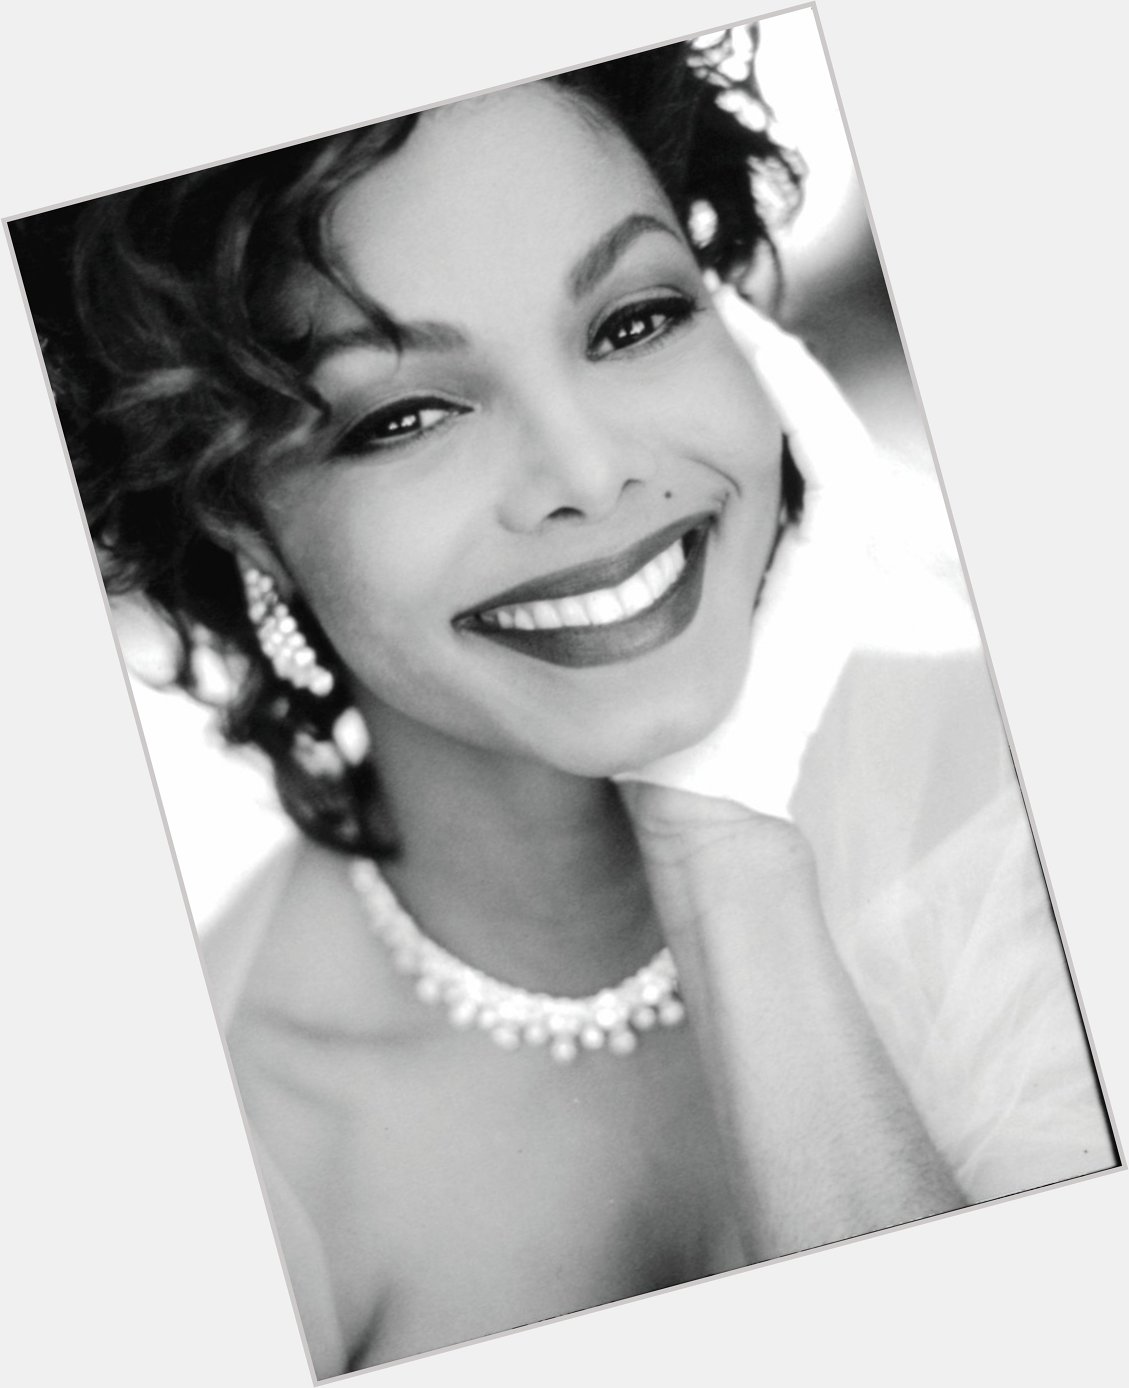 Happy birthday to one of my favorite artists of all time, the one and only, Janet Jackson   